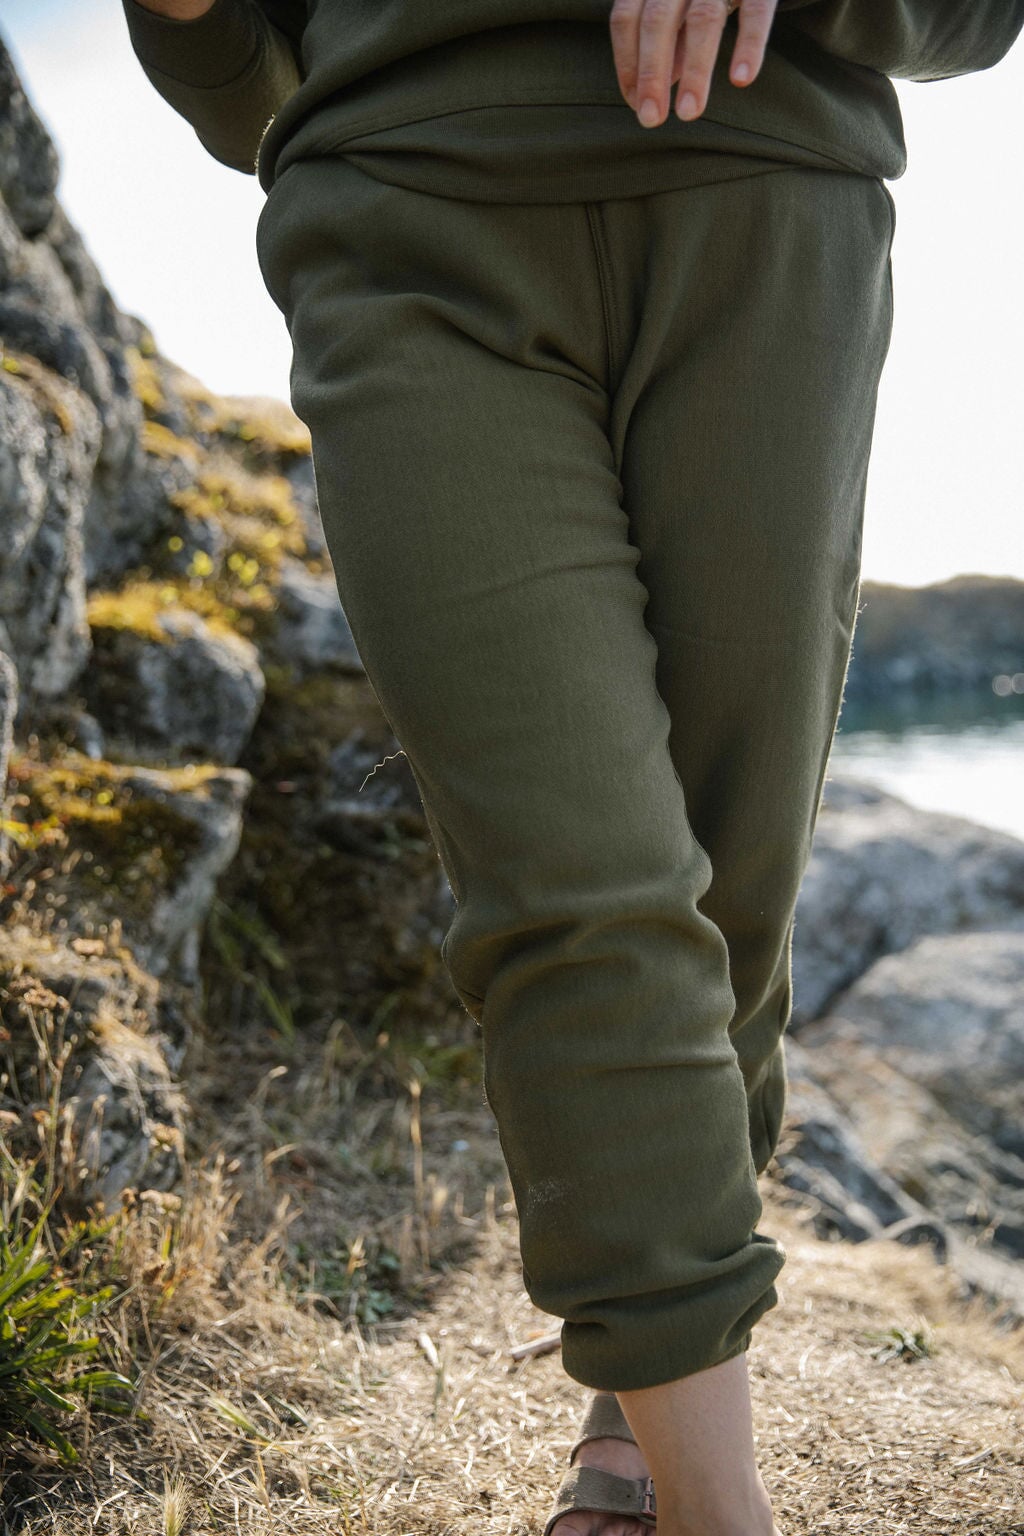 Vermont Sweatpants - Elastic Cuff - The Vermont Clothing Company